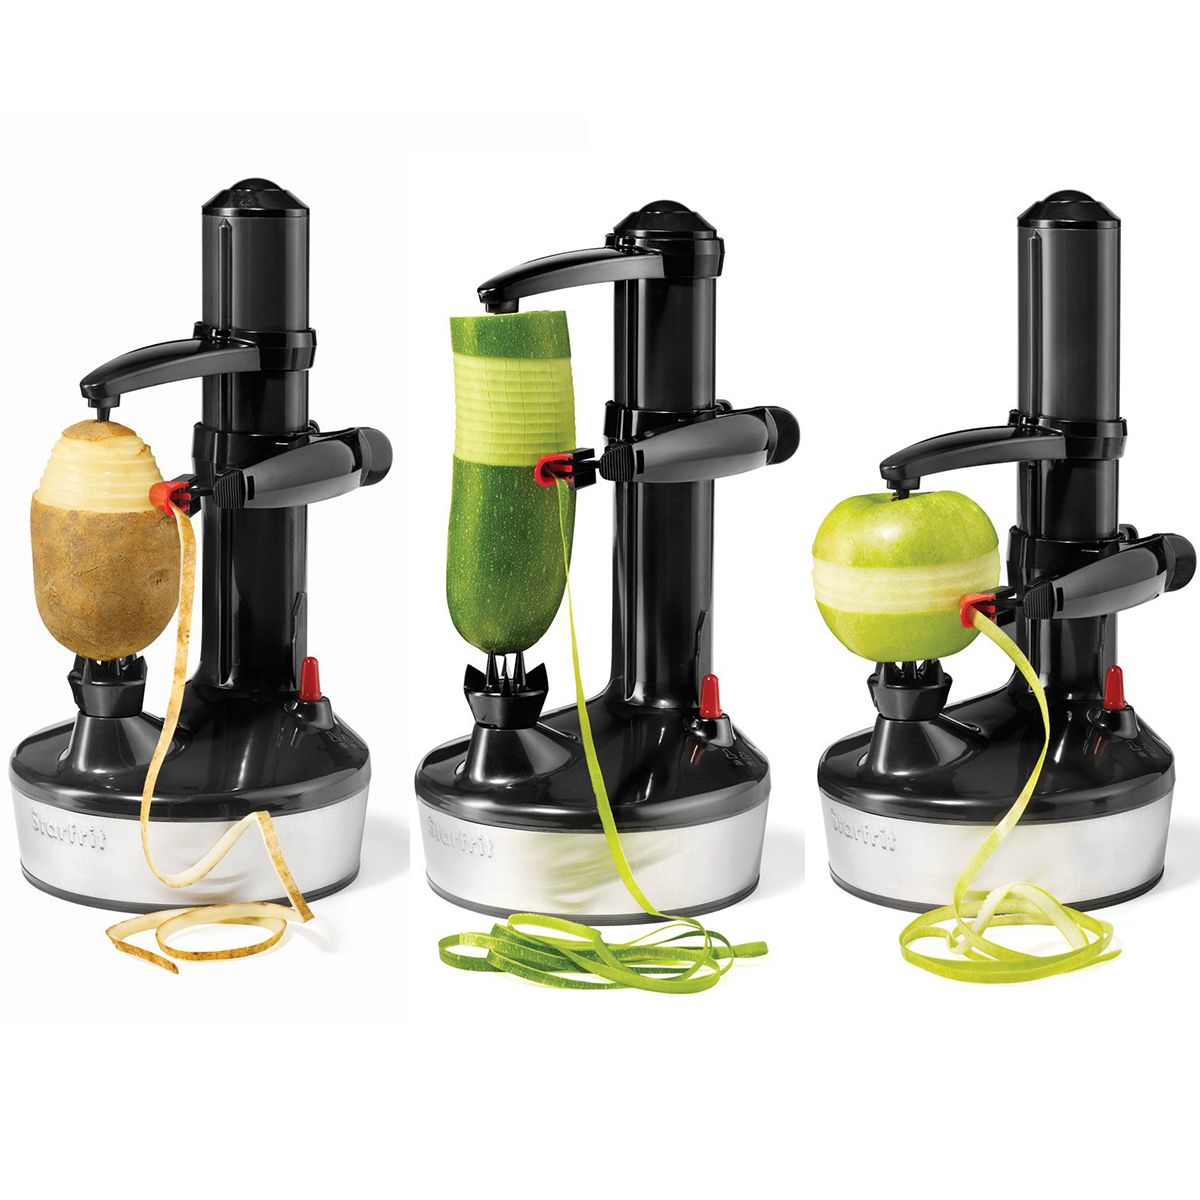 This Electric Potato Peeler Will Help Make Holiday Food Prep So Easy